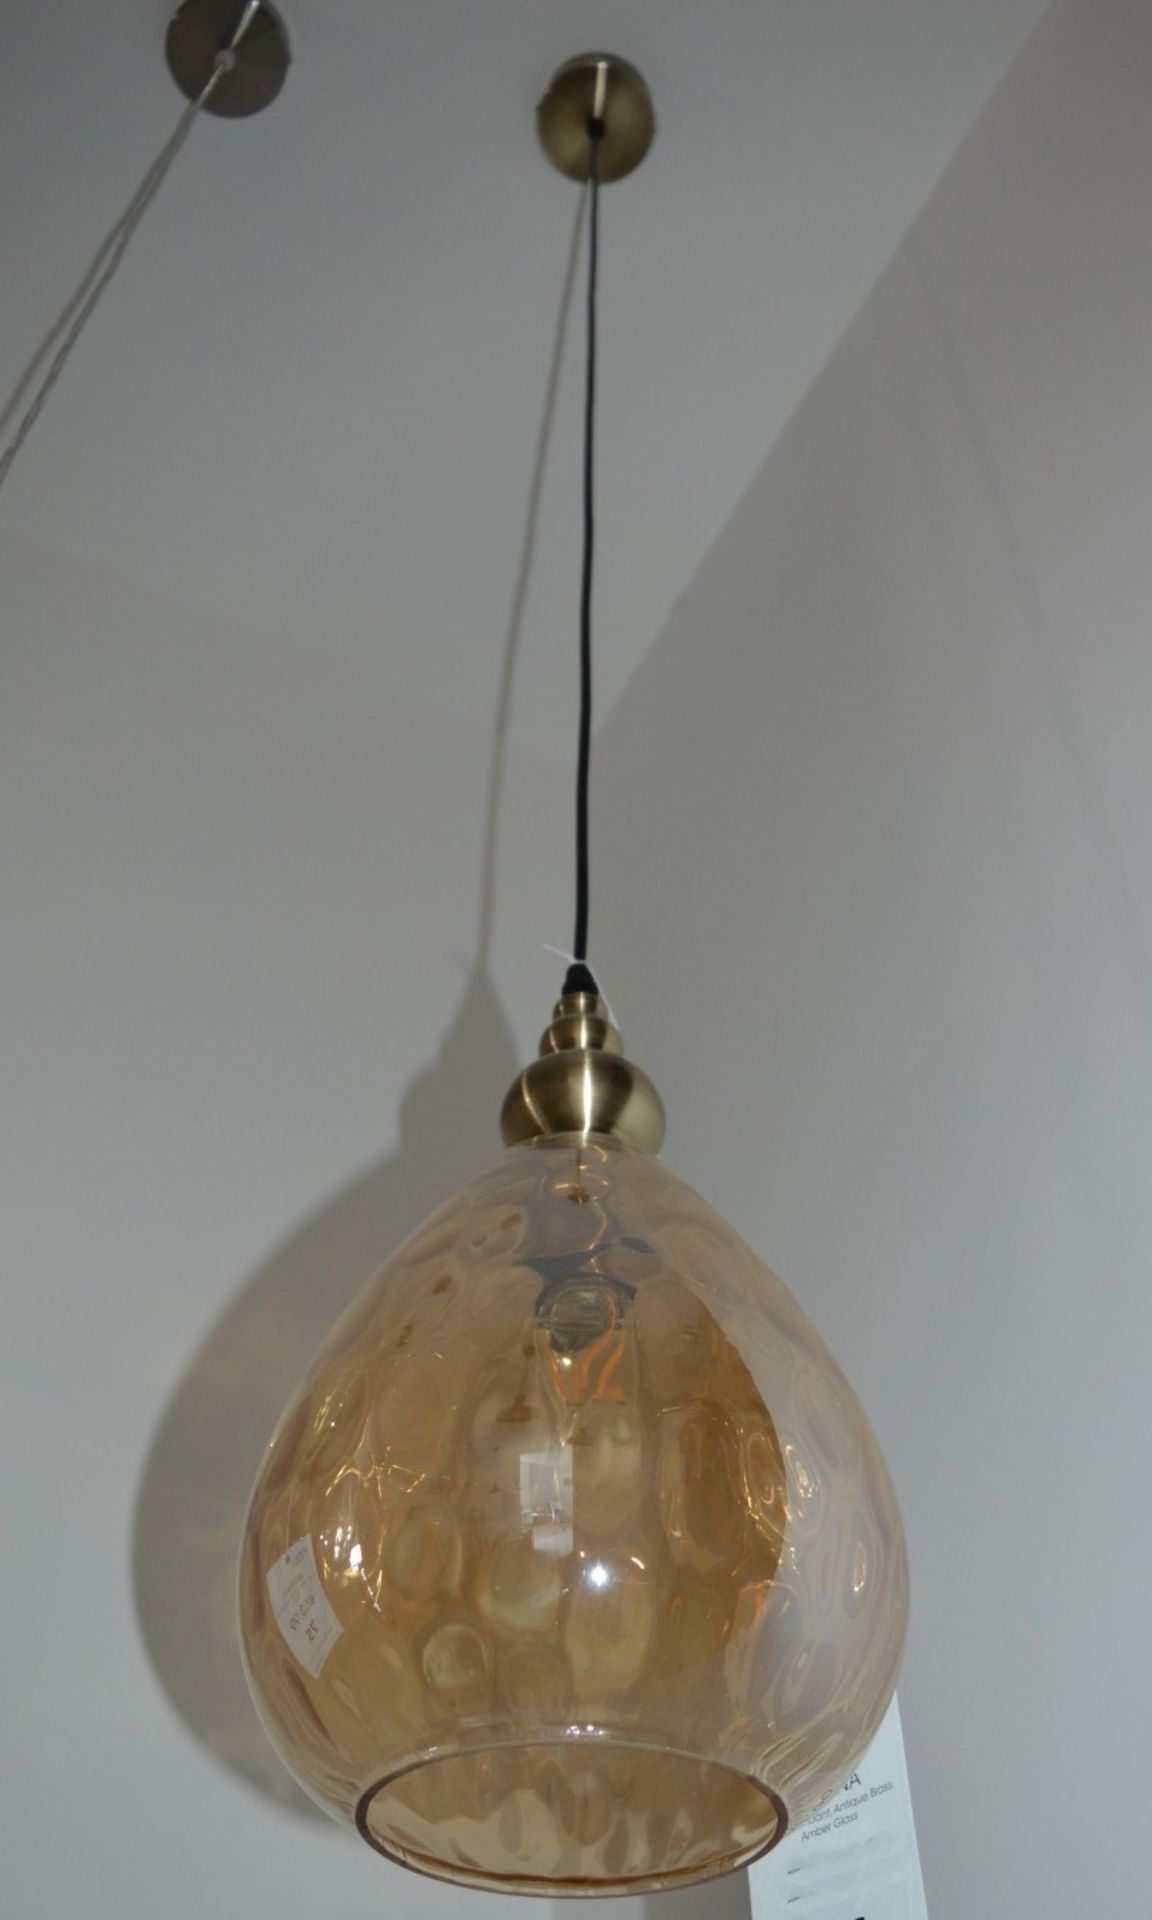 1 x INDIANA Pendant Light With Dimpled Glass Shade - Ex Display Stock - CL298 - Ref J076 - Location: - Image 3 of 4